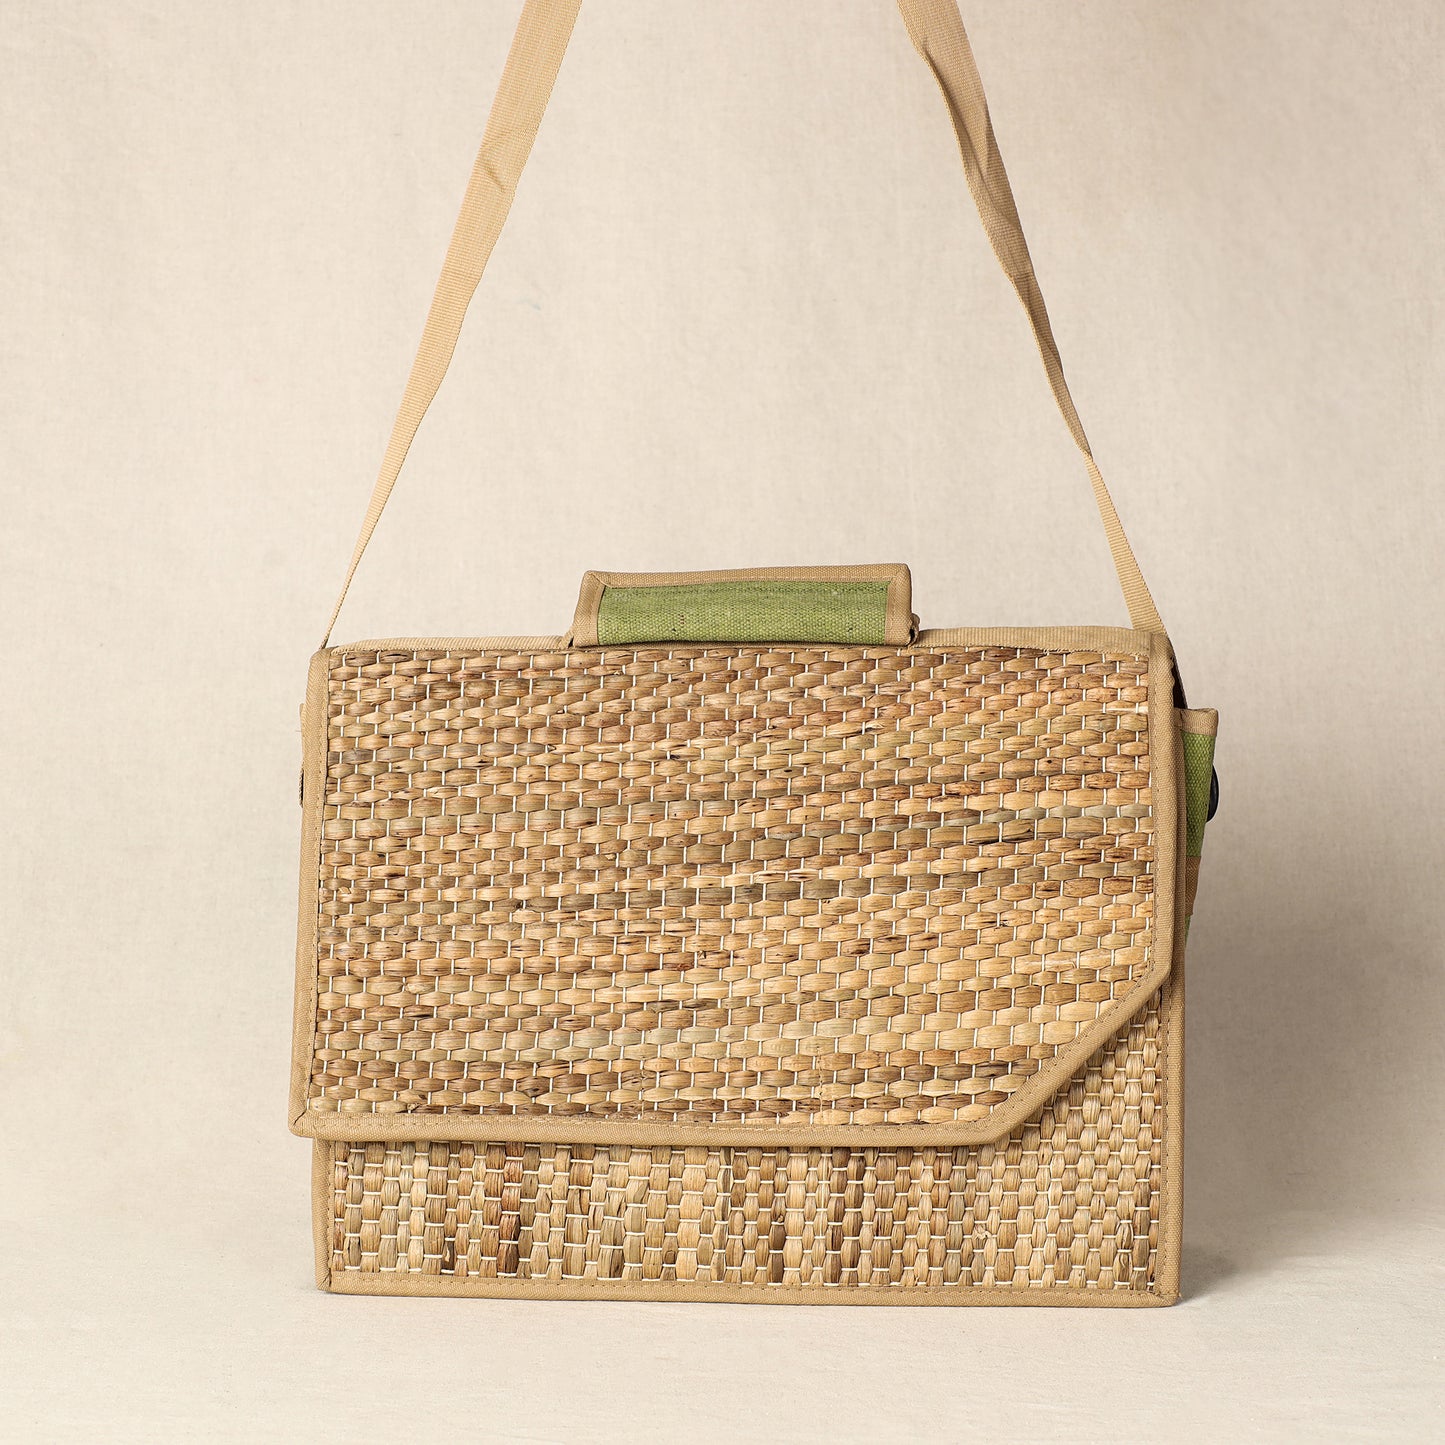 water hyacinth conference bag